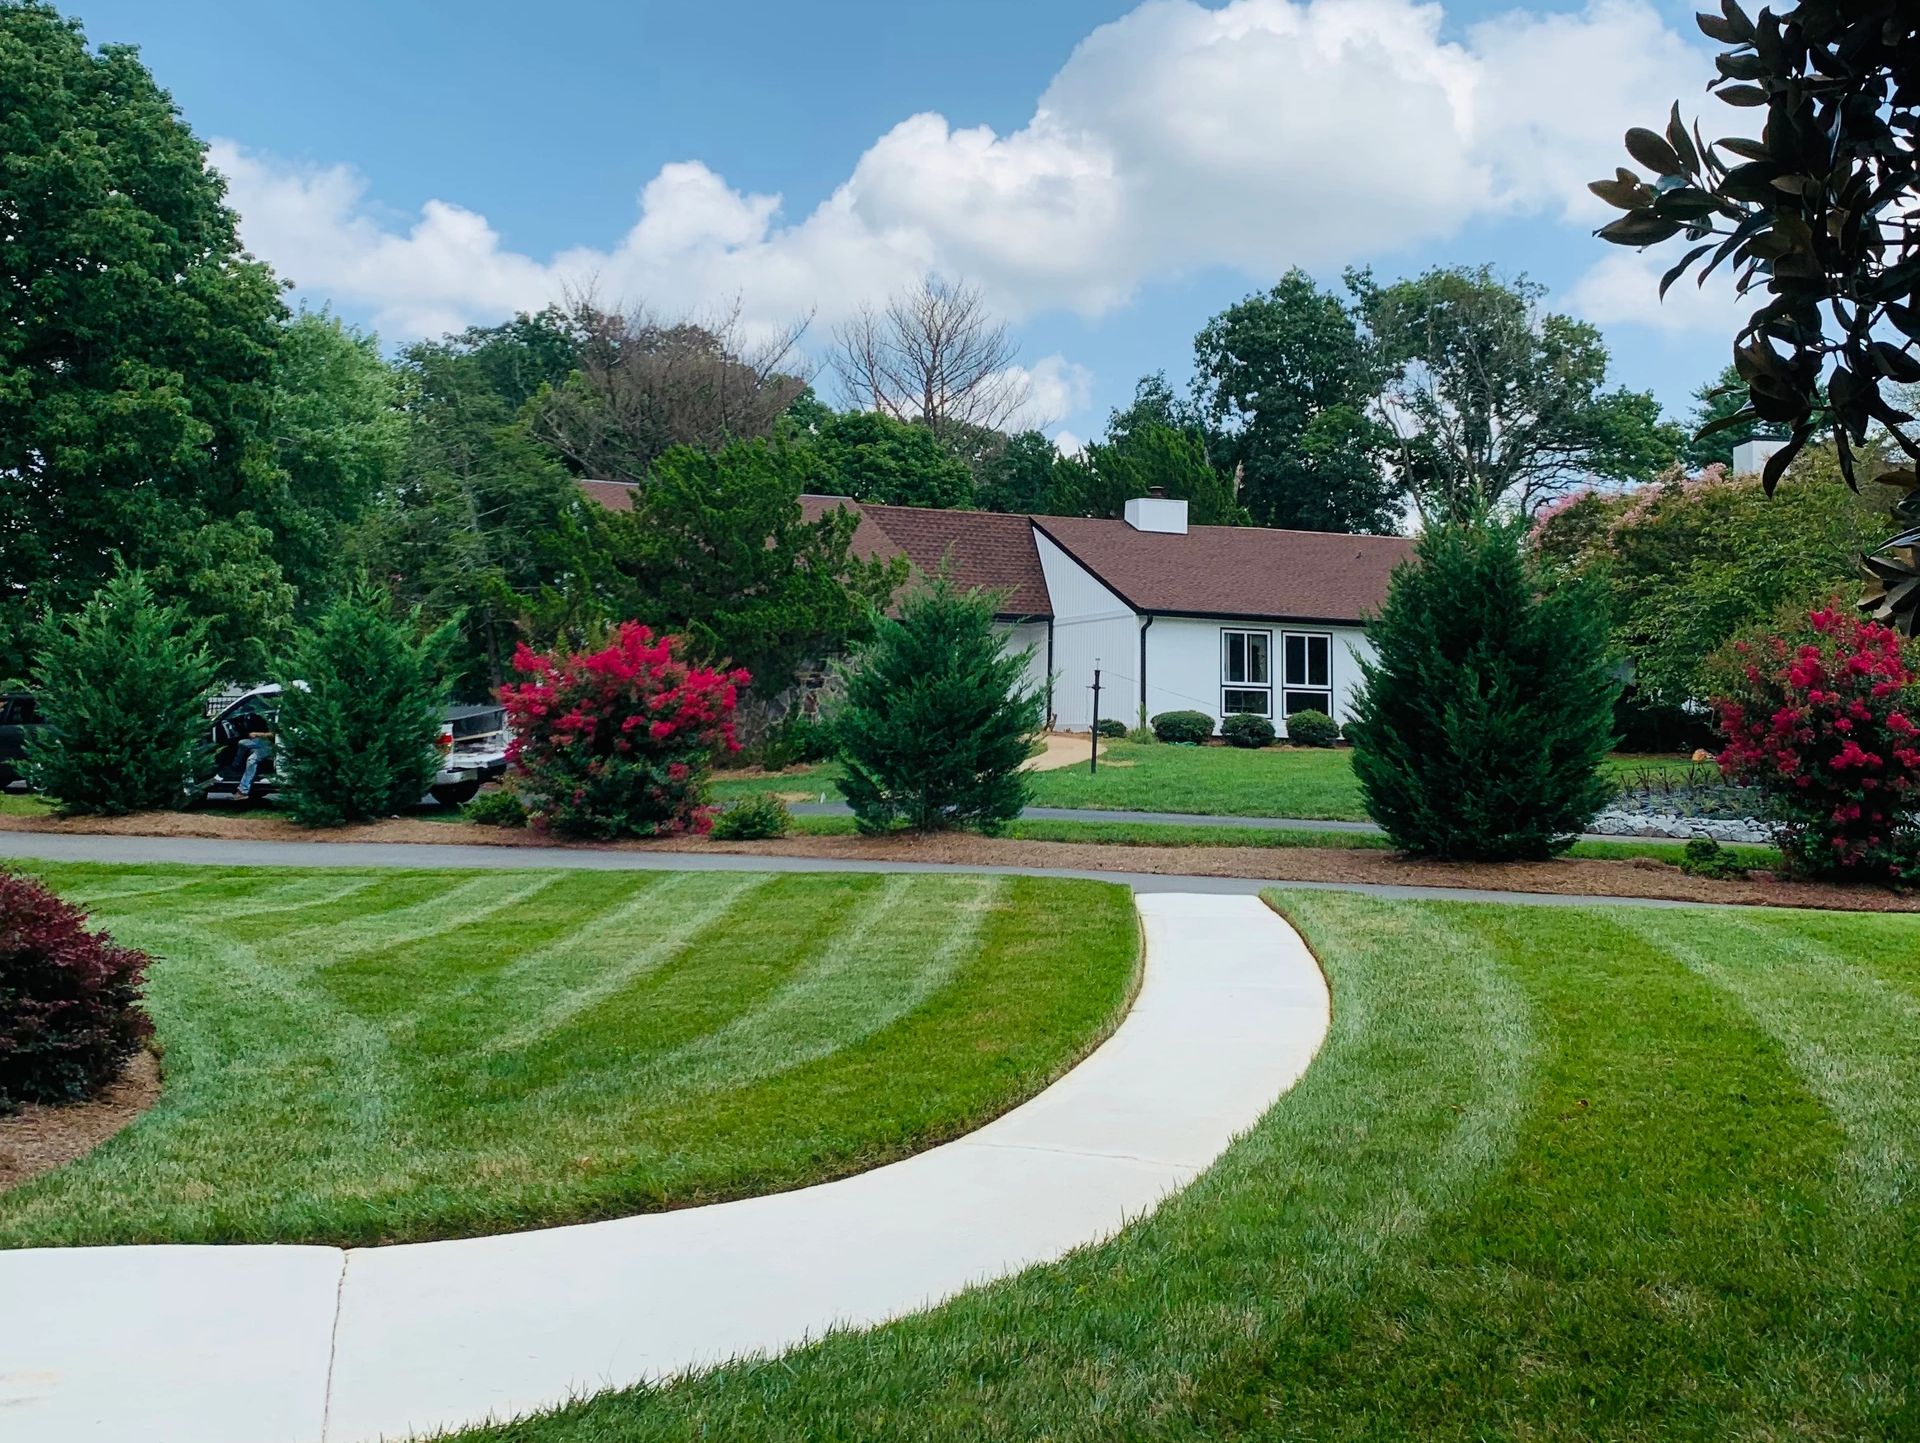 A neatly manicured lawn with a curved concrete pathway leading to a white house with black shutters 